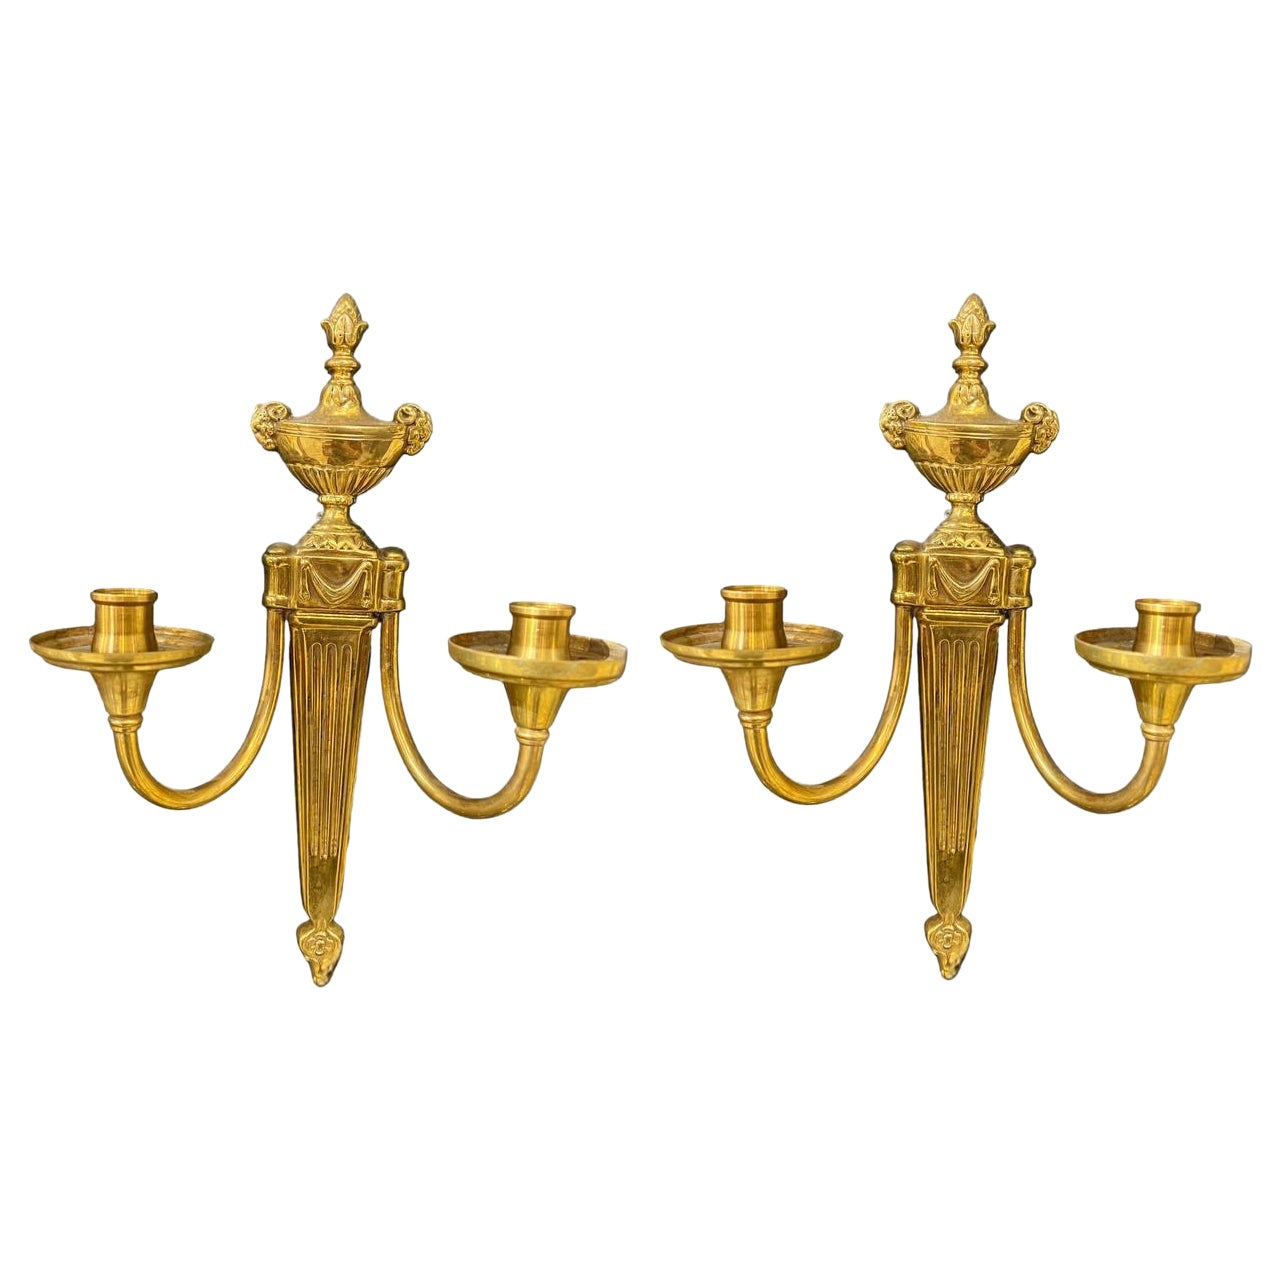 Caldwell Sconces With Rams Heads